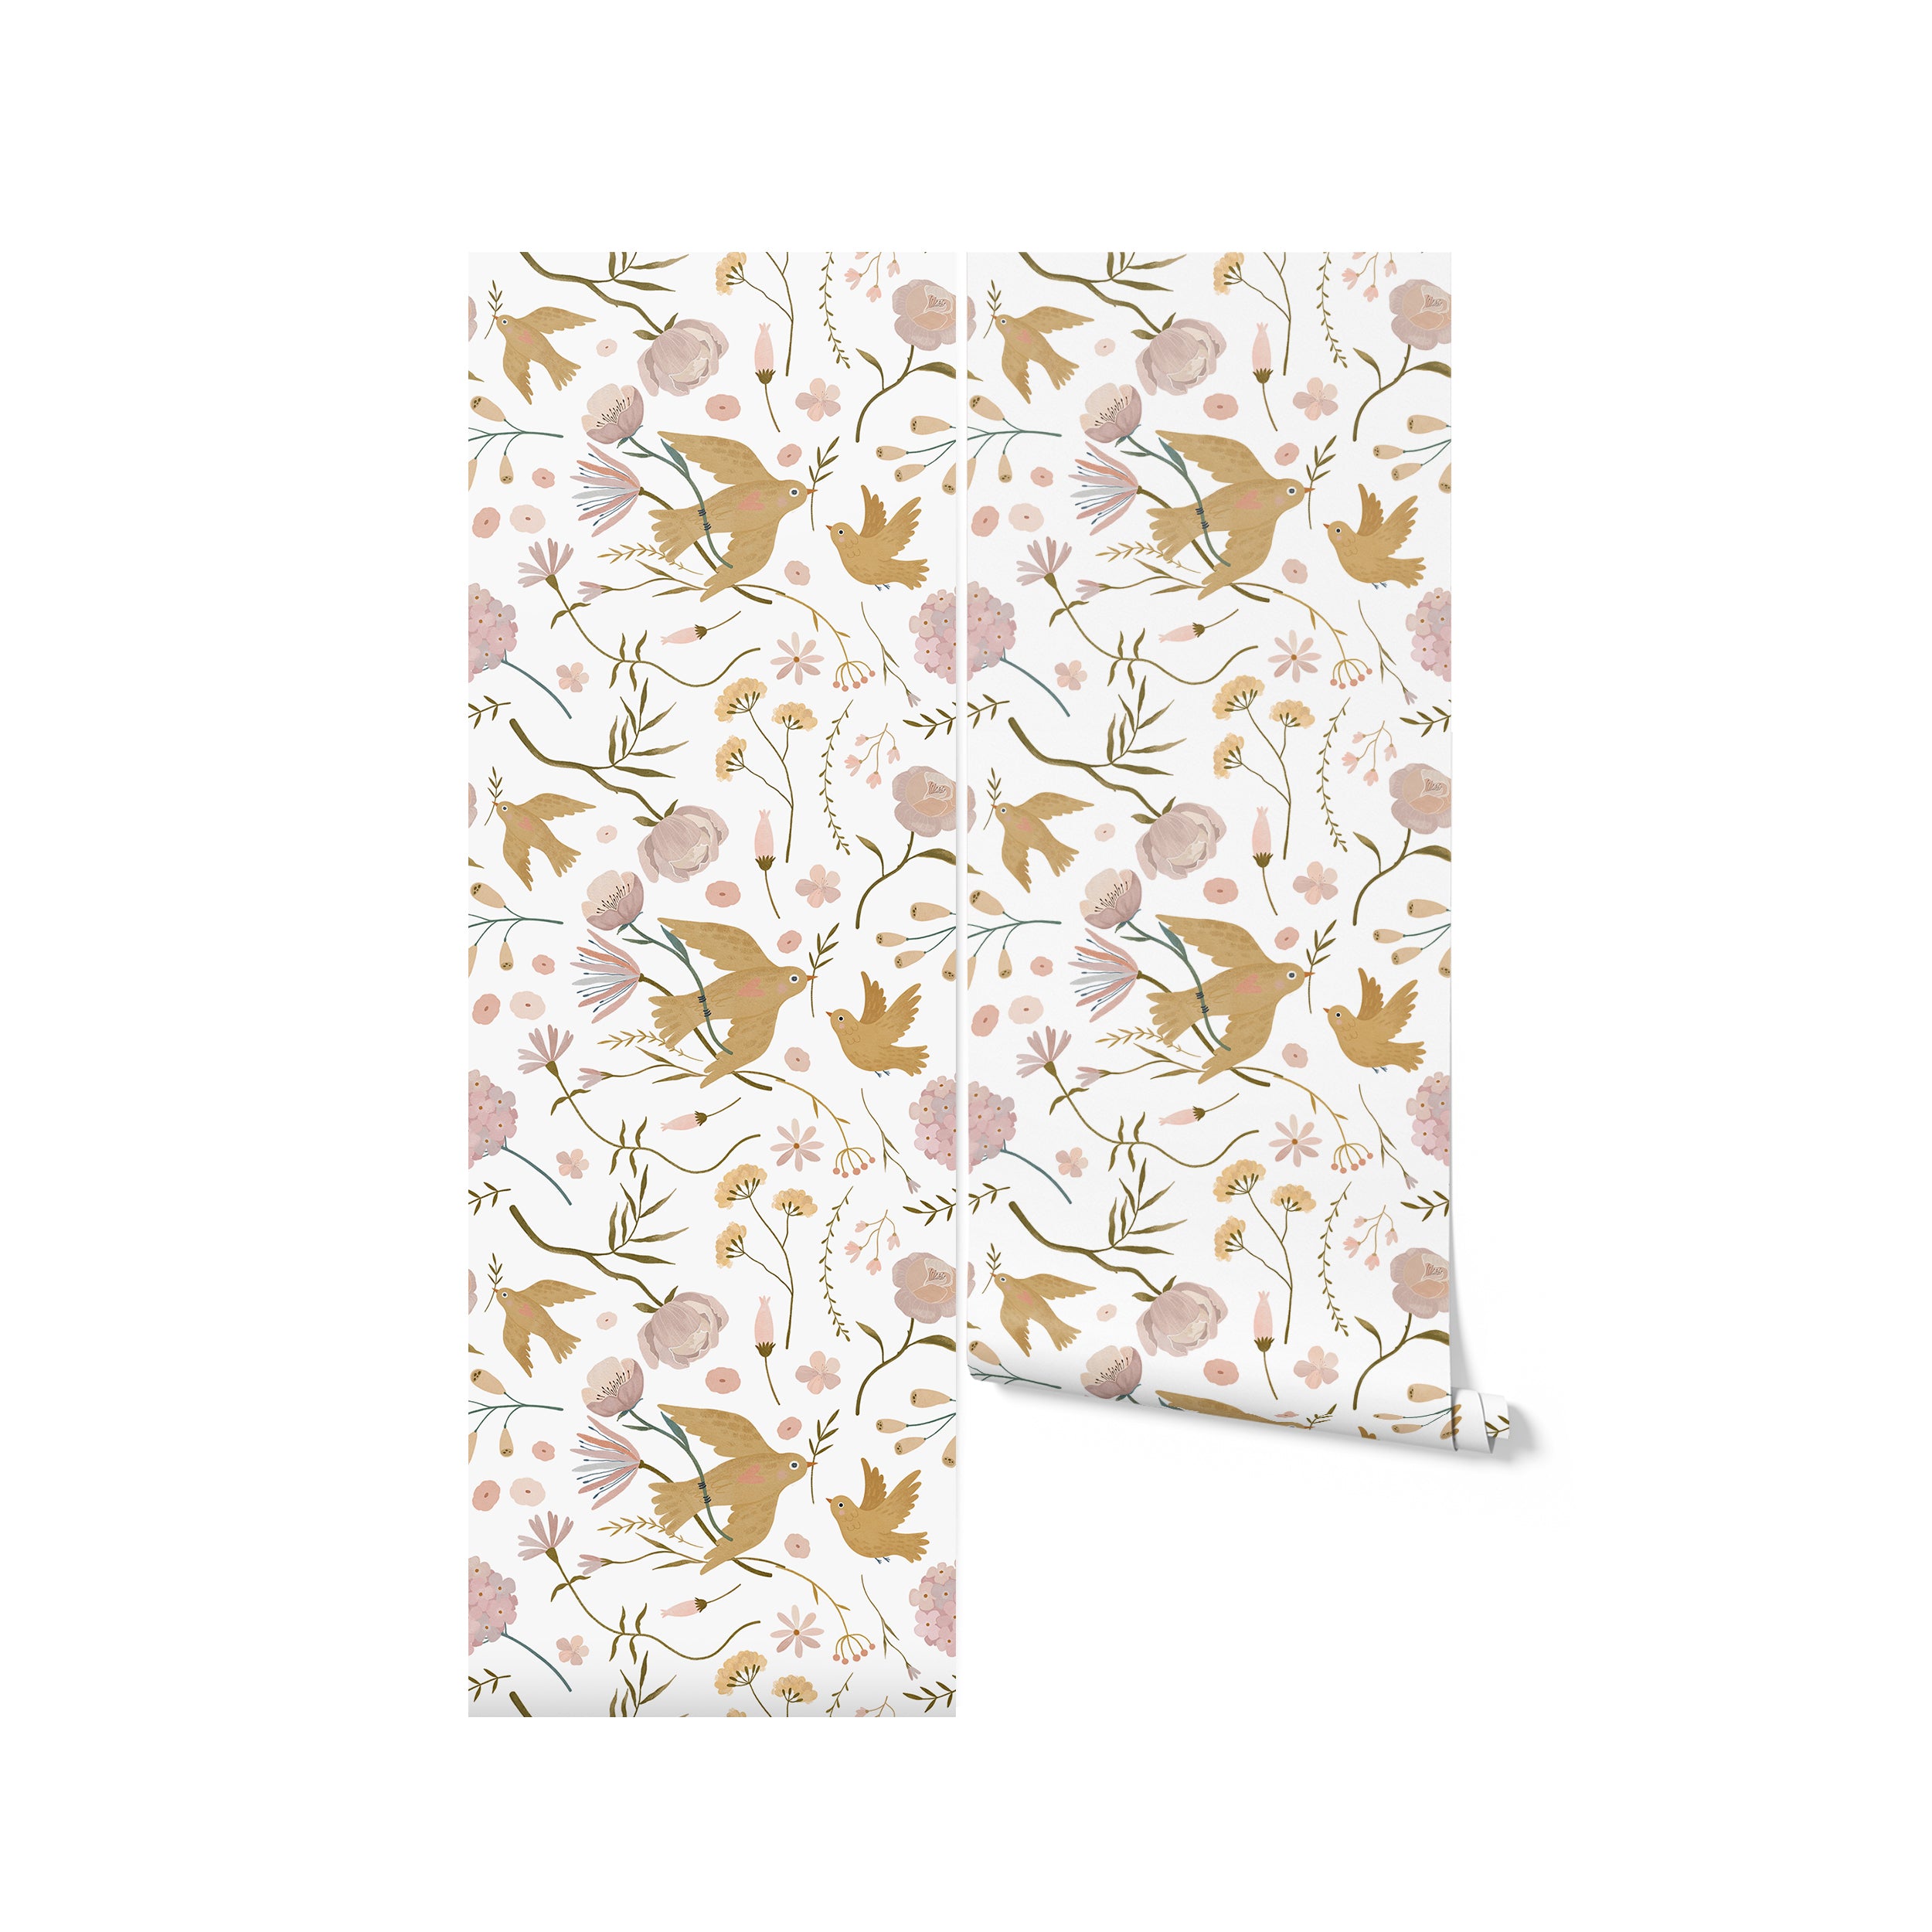 A roll of Pastel Garden Wallpaper, presenting a lively print of birds, flowers, and botanicals in muted pastel shades, ideal for adding a touch of springtime charm to any room